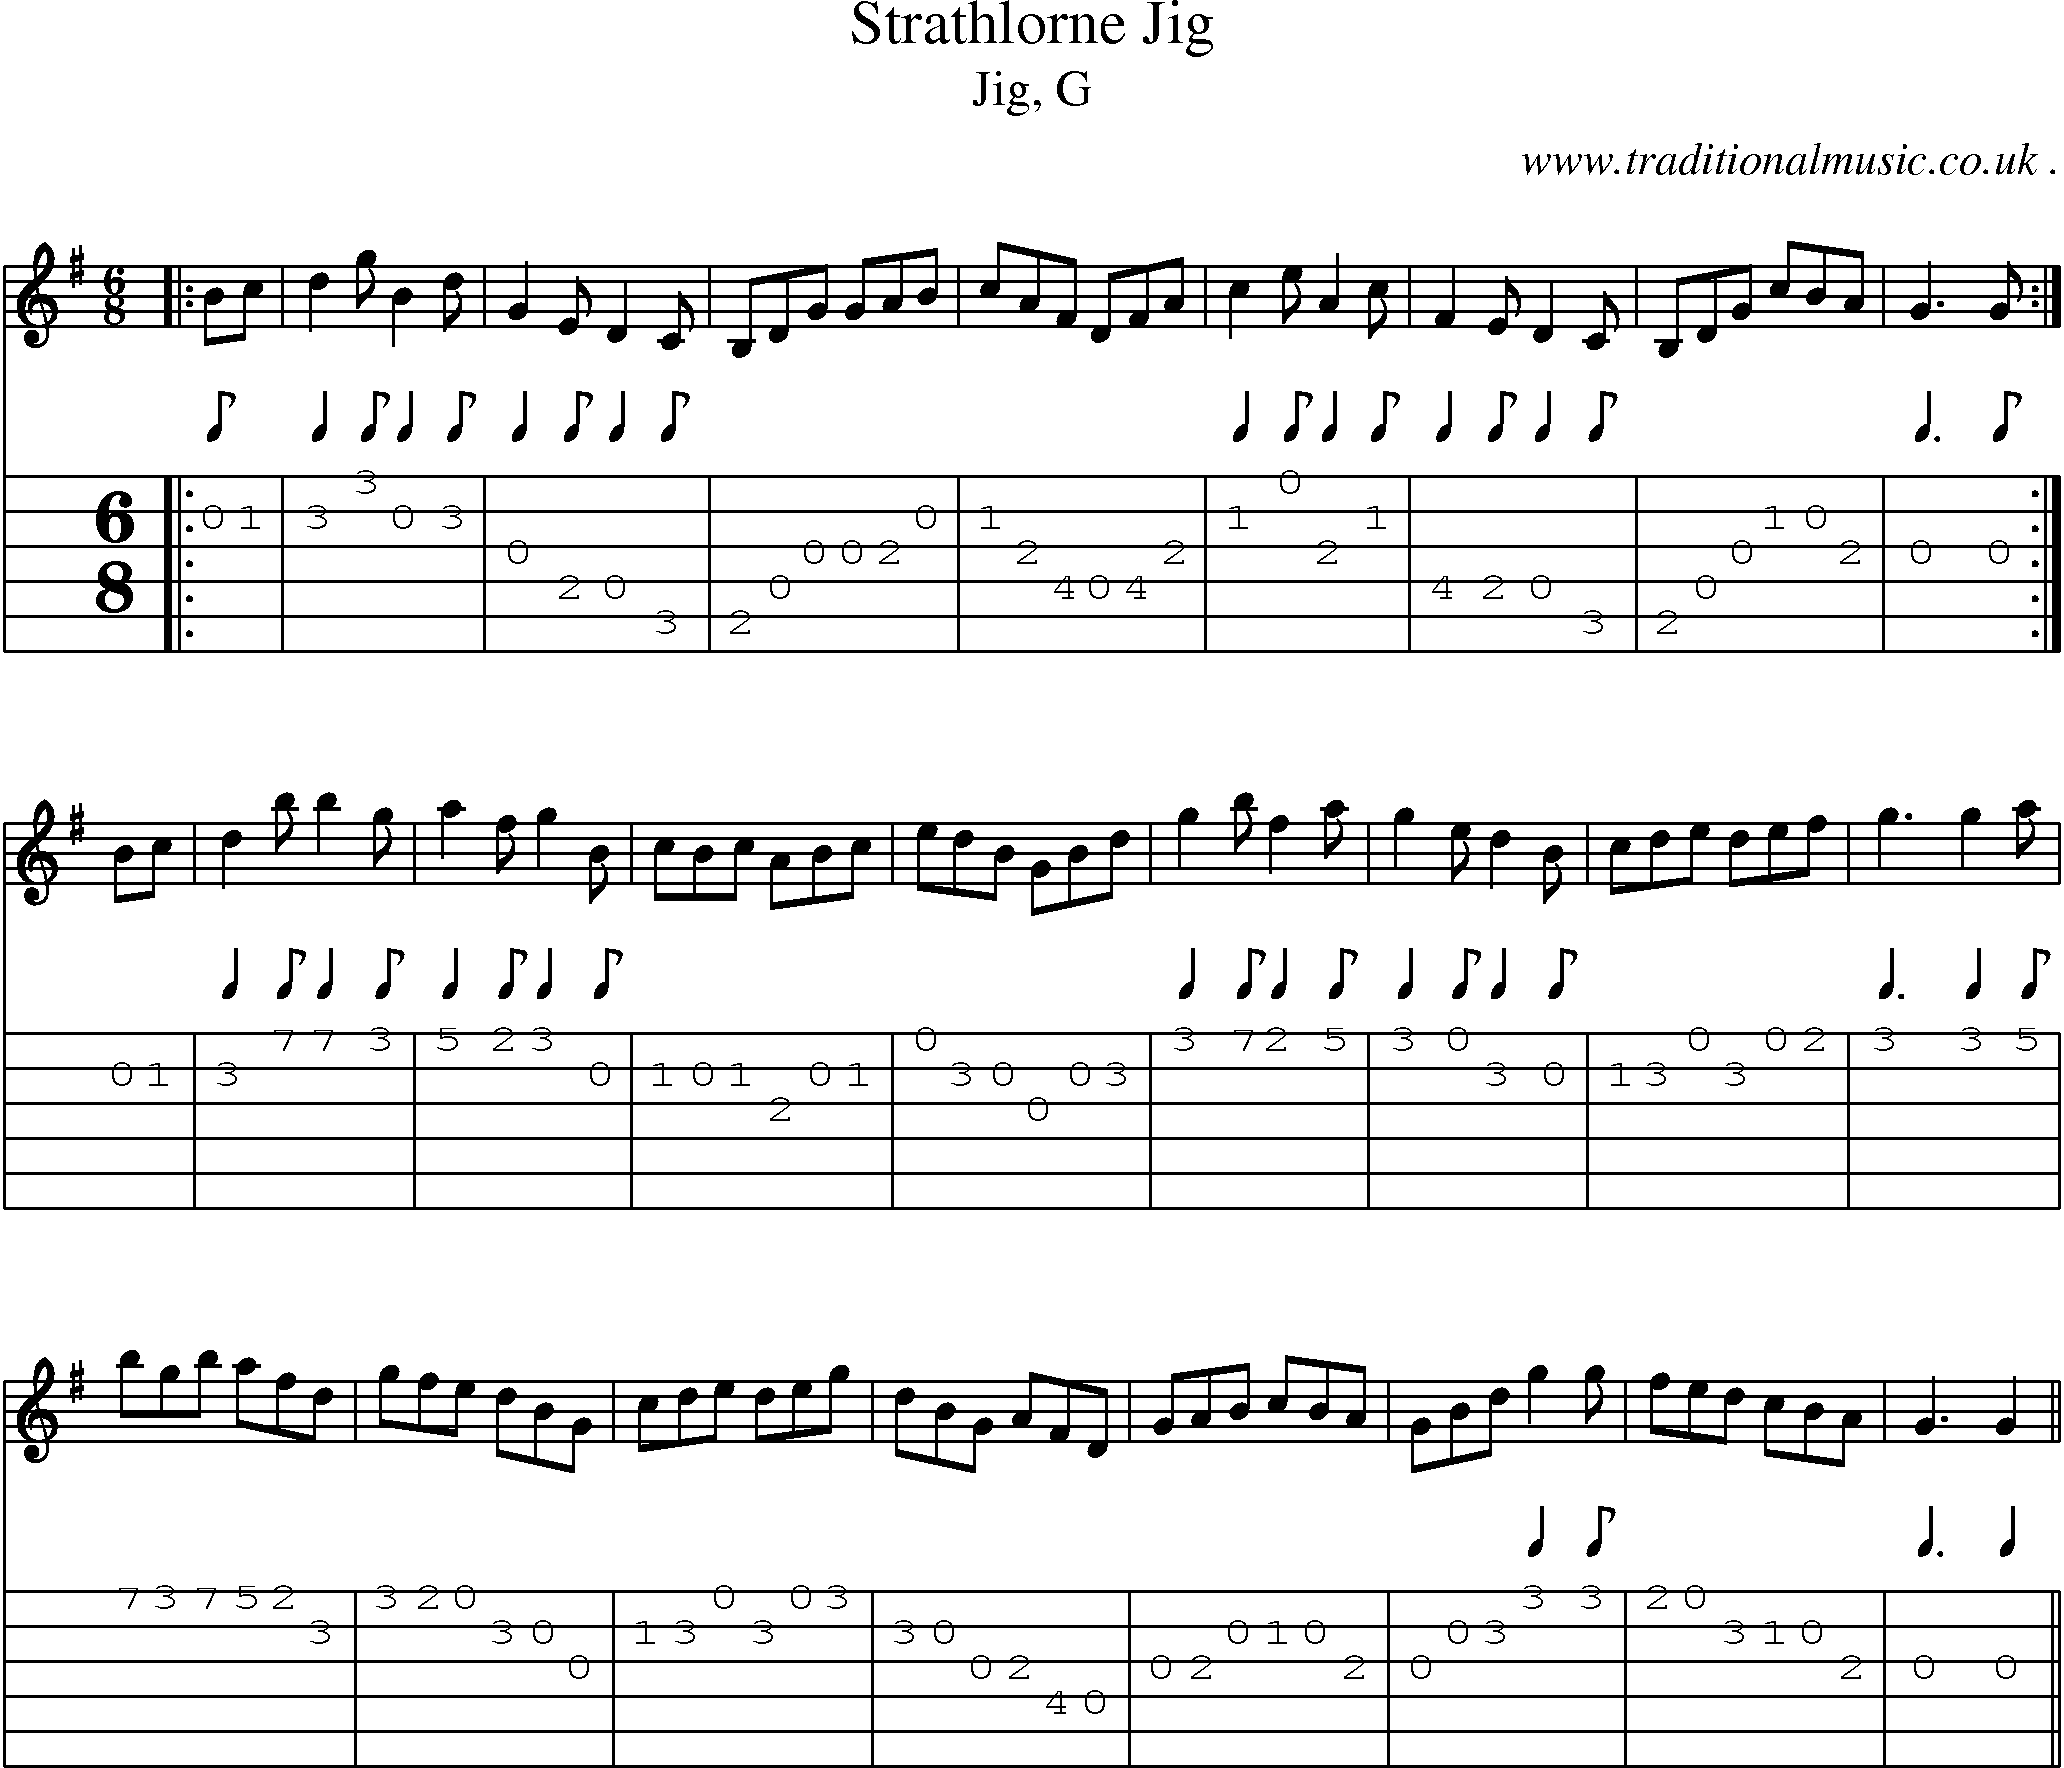 Sheet-music  score, Chords and Guitar Tabs for Strathlorne Jig